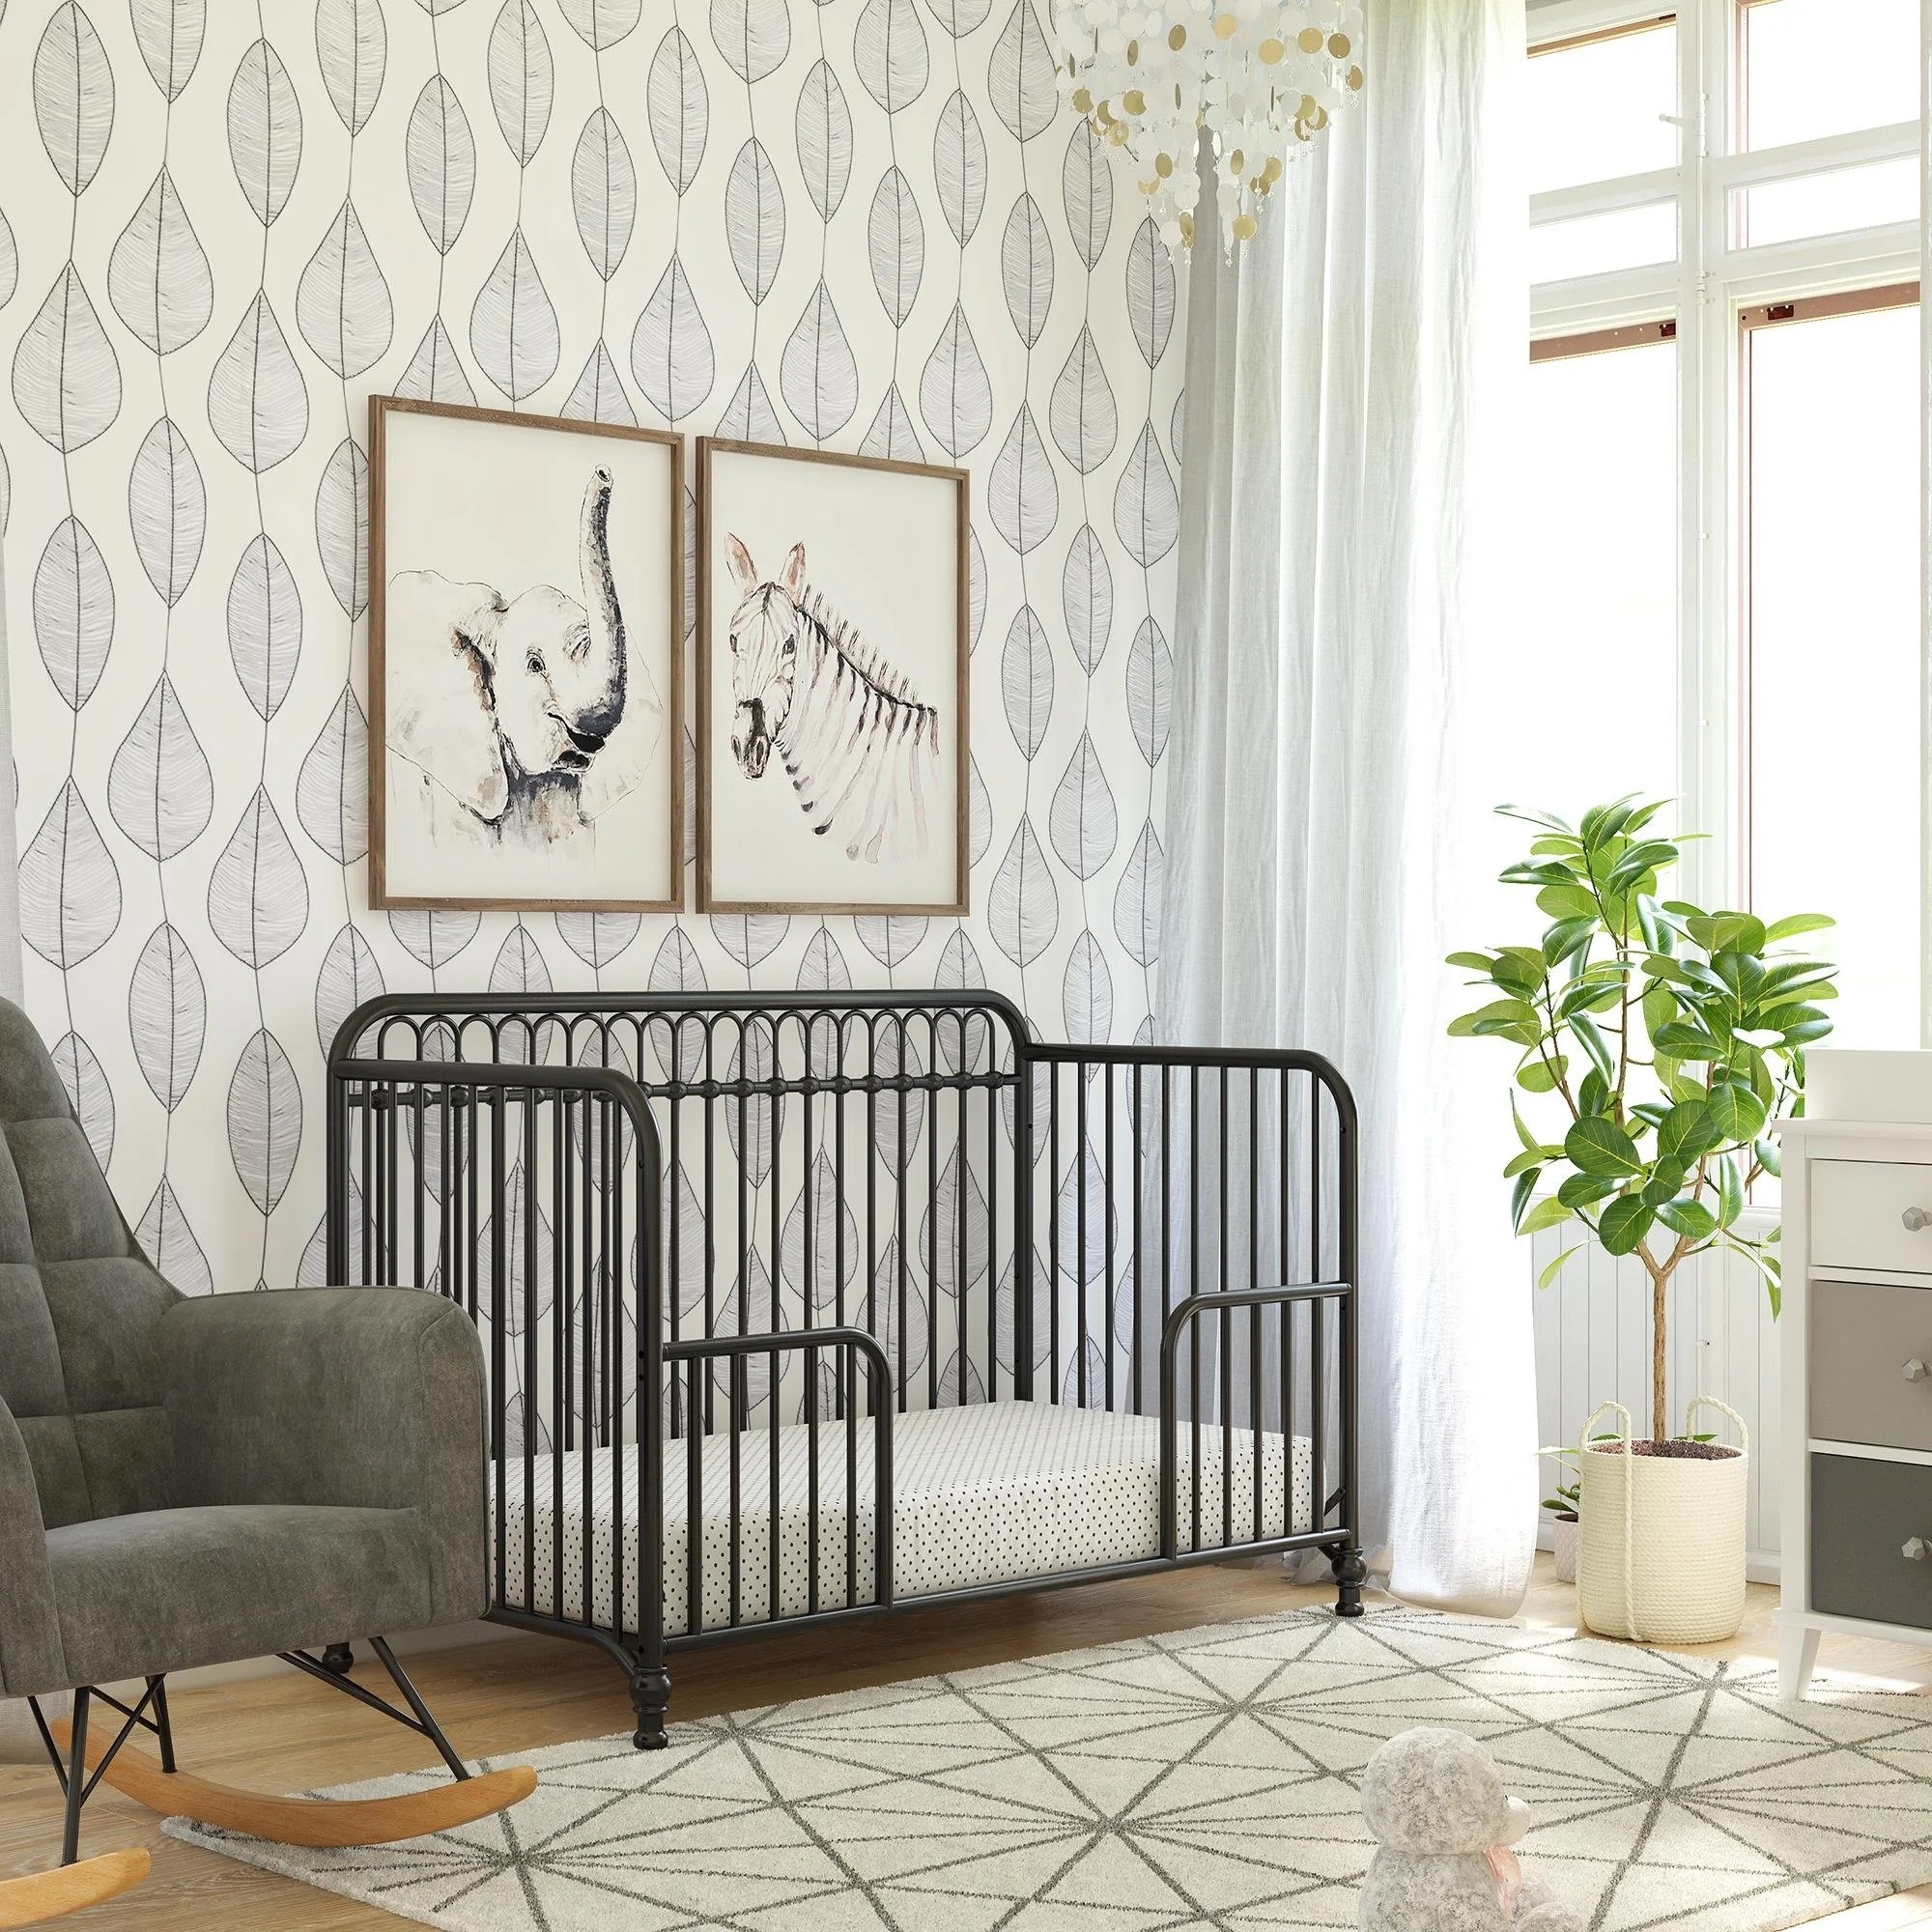 The crib converted into a toddler bed, in black